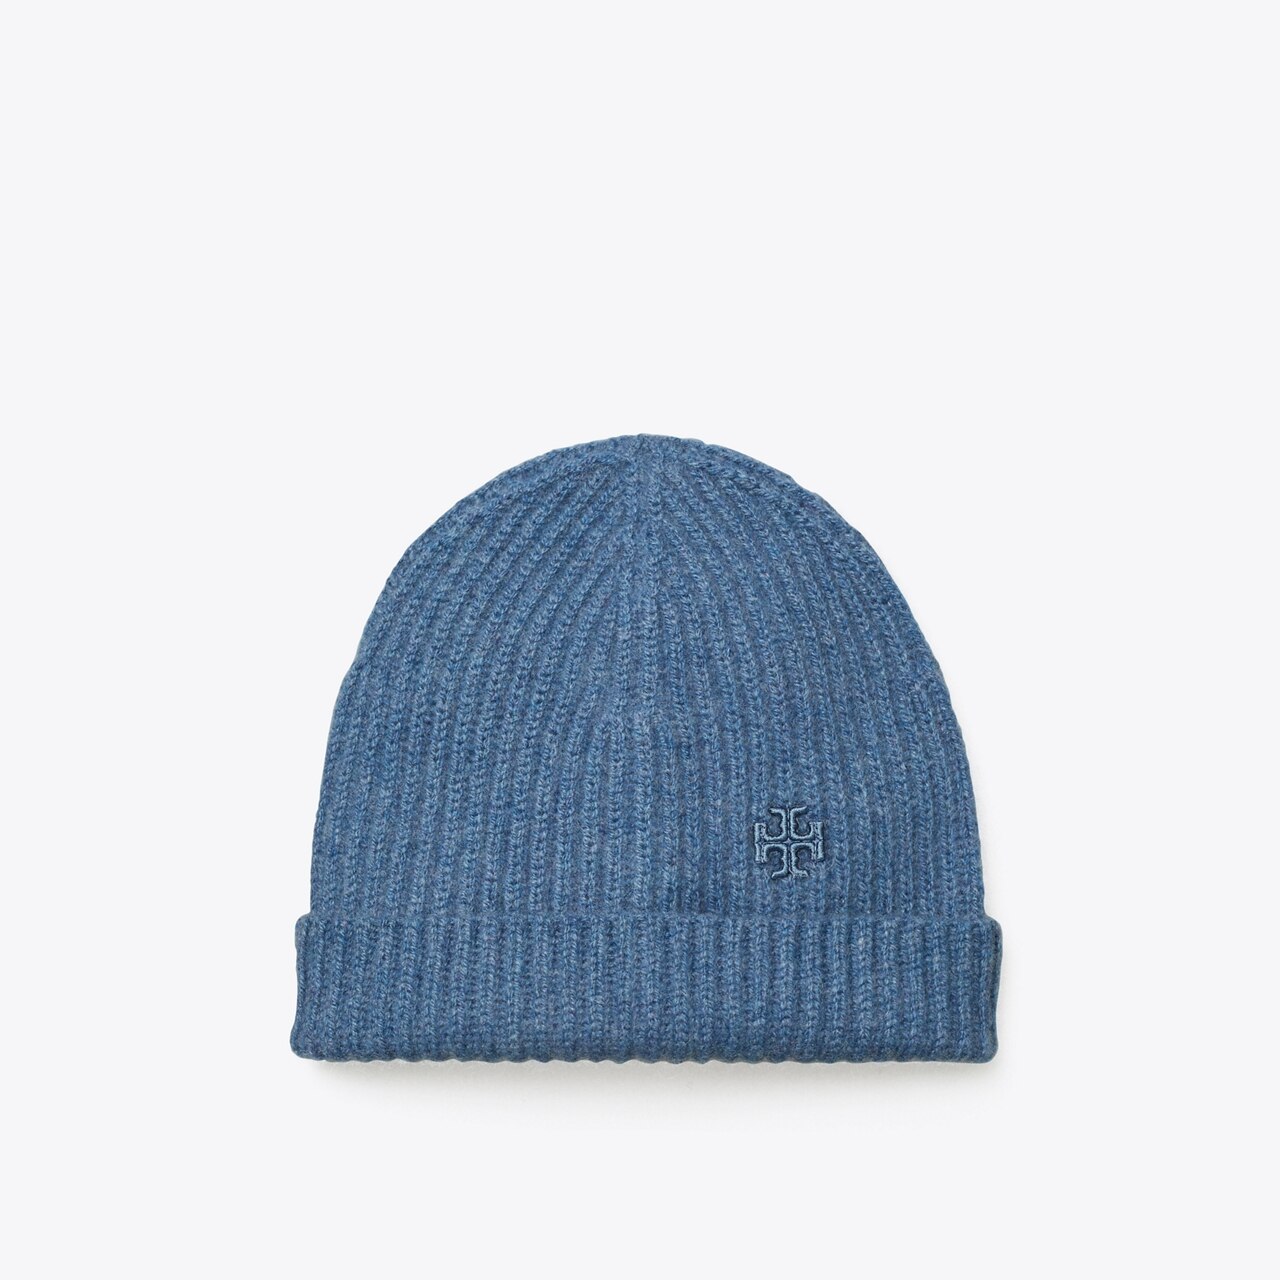 Luxury Designer Woolen Denim Beanie With Ear Protection And Wind Resistance  BRA DA Correct P Letter Fashion Caps From Iluxury_brands, $10.1